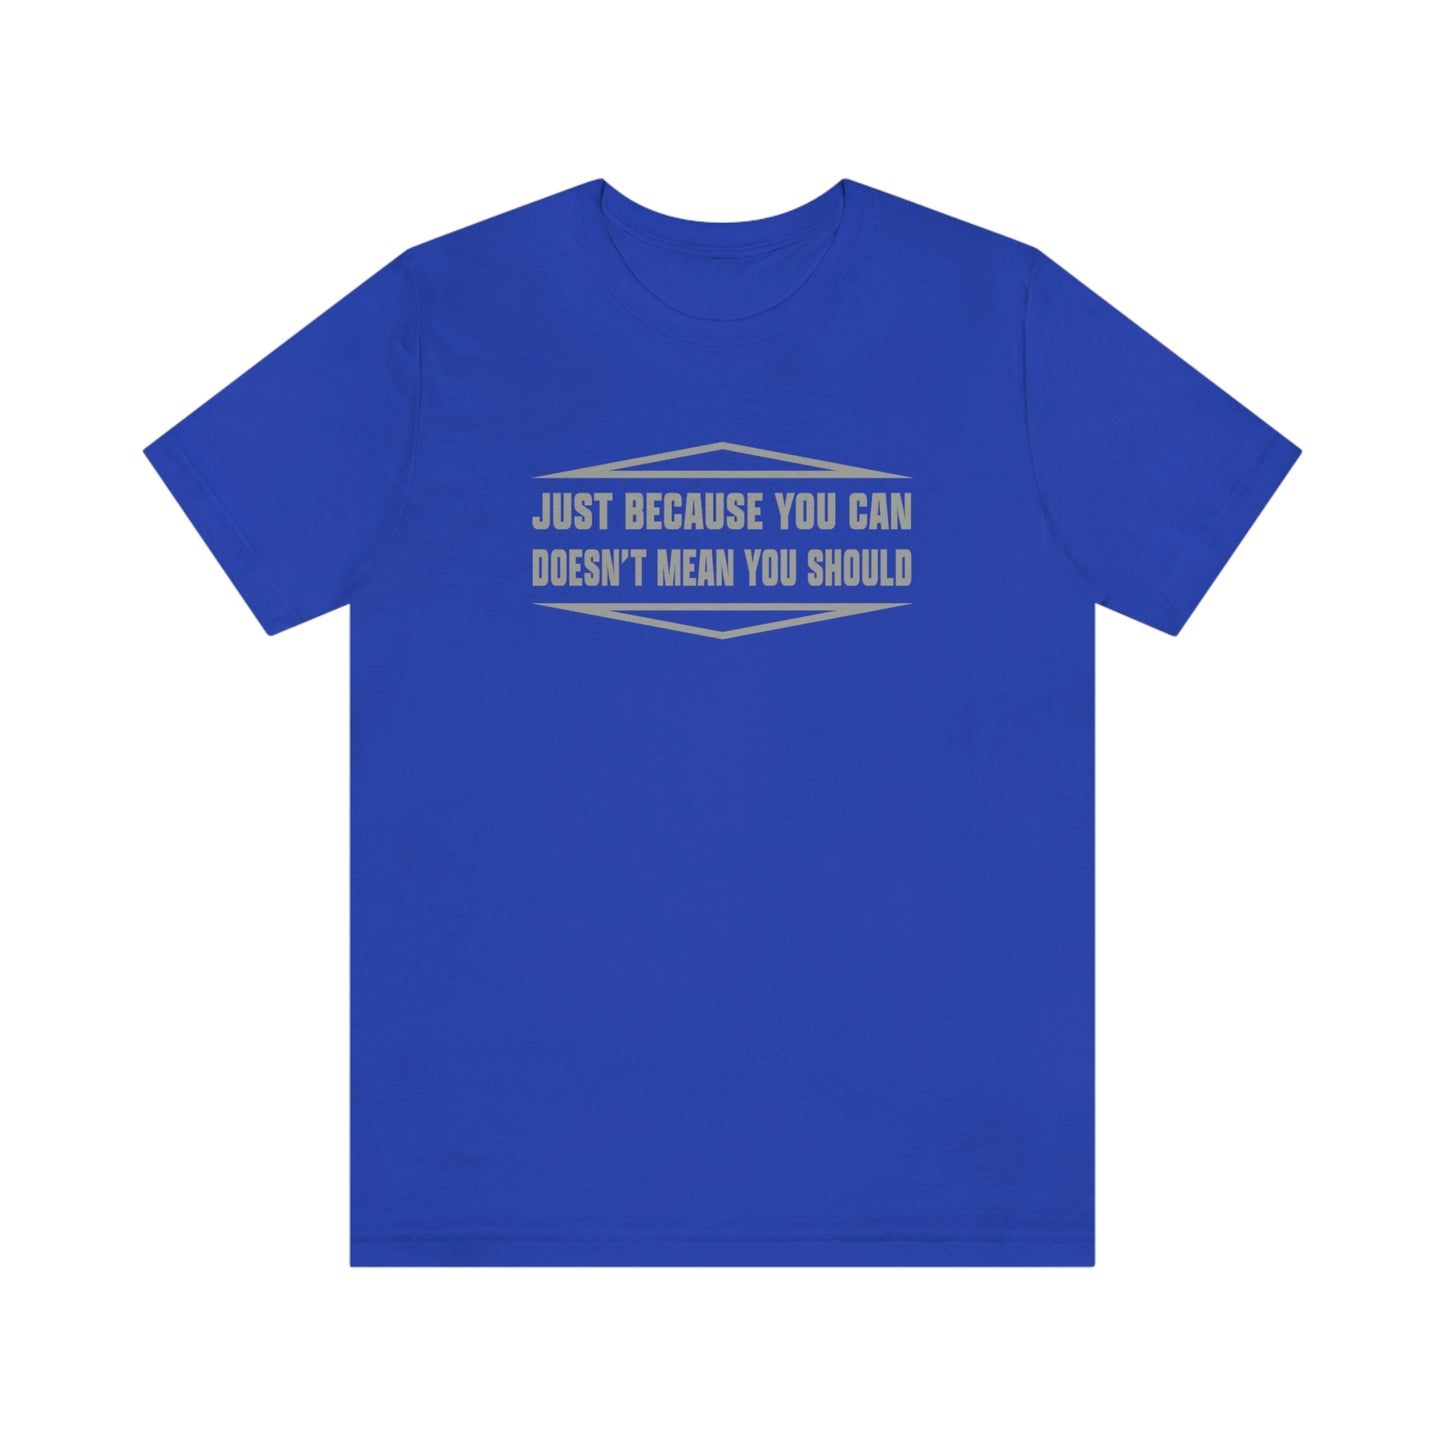 Just Because You Can Doesn't Mean You Should - Unisex T-Shirt